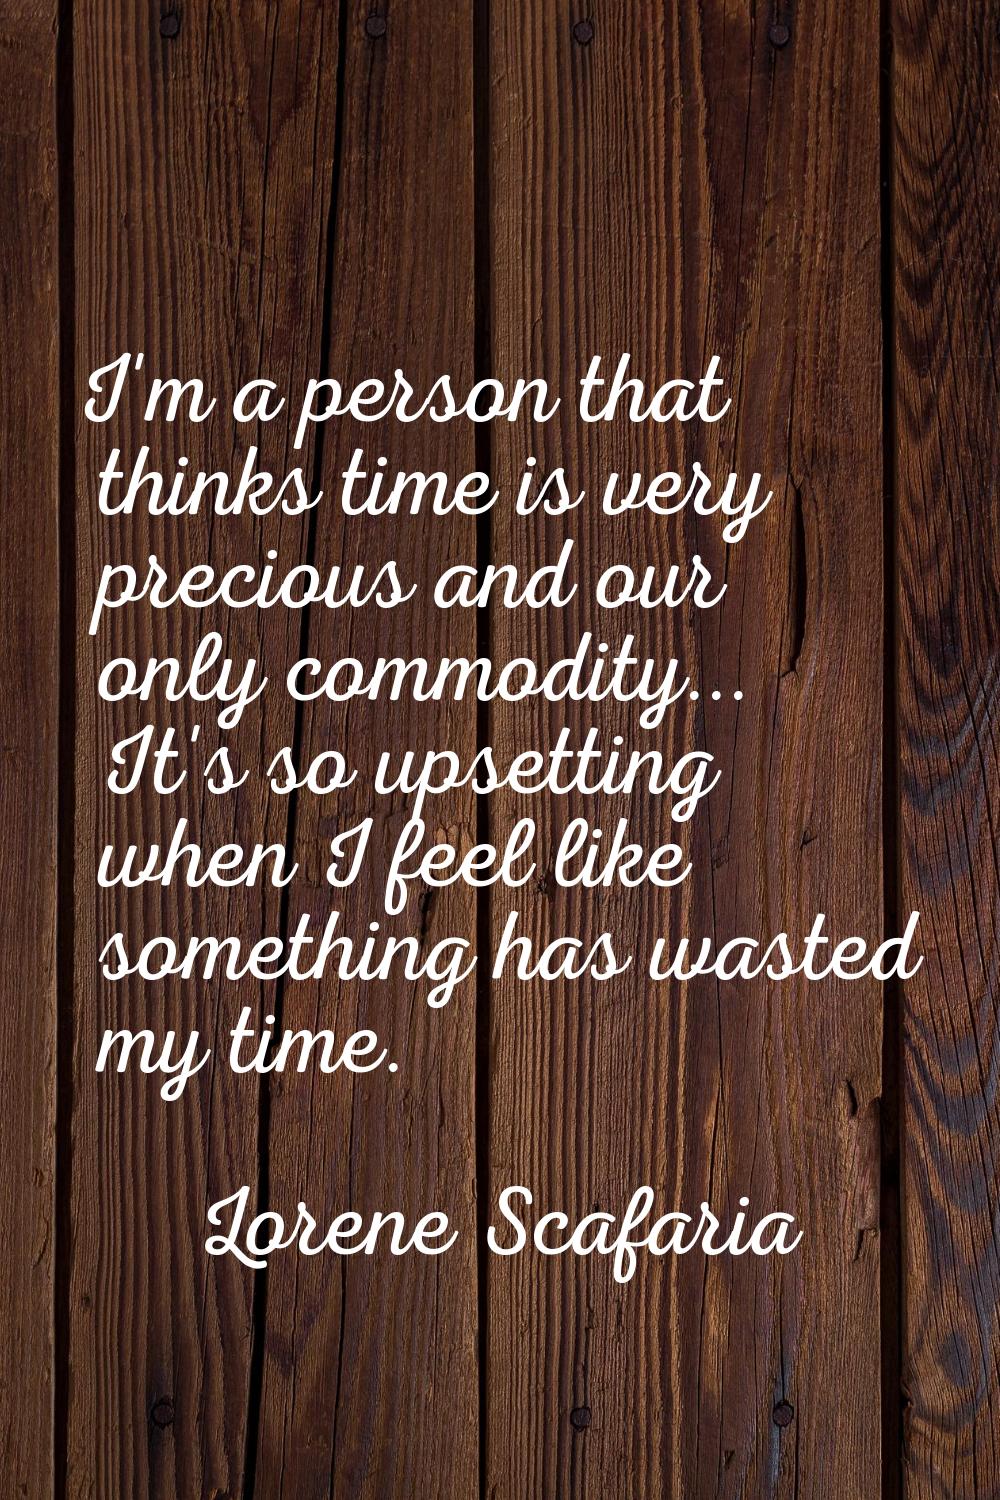 I'm a person that thinks time is very precious and our only commodity... It's so upsetting when I f